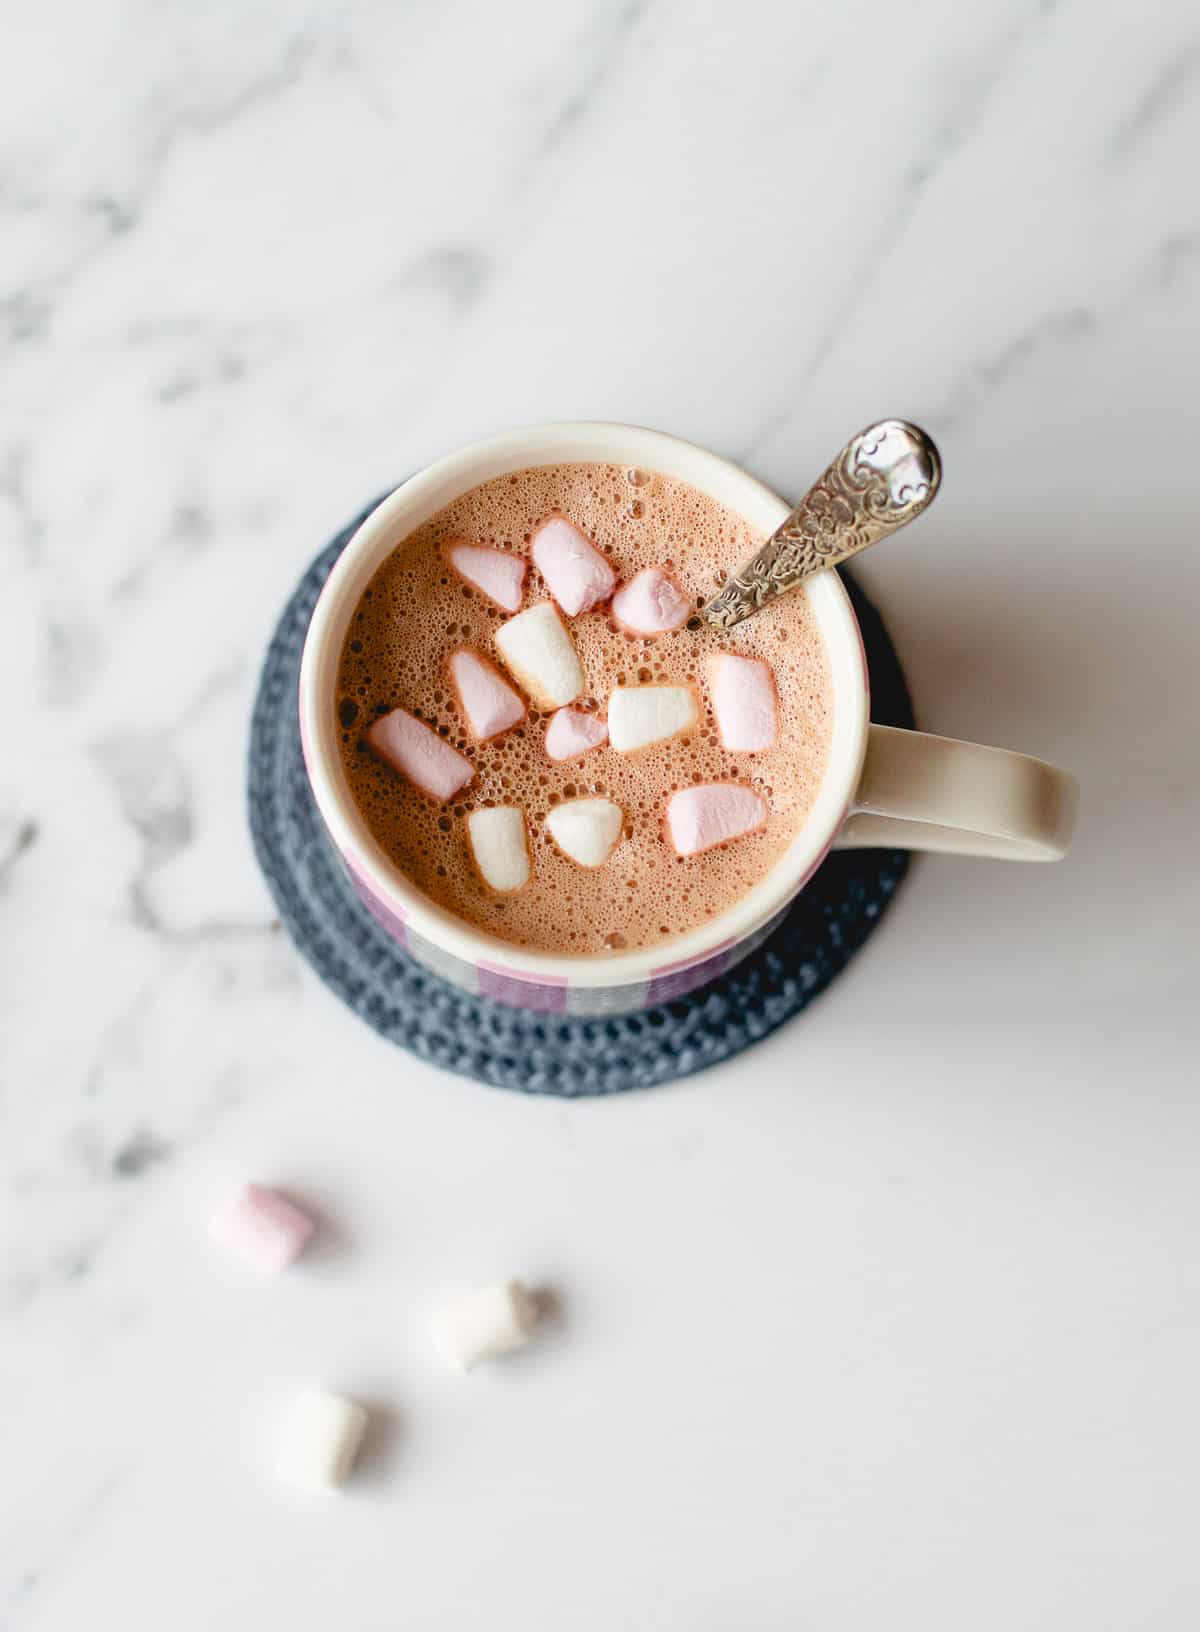 Overhead image of hot chocolate with mini Marshmallows in a white mug.